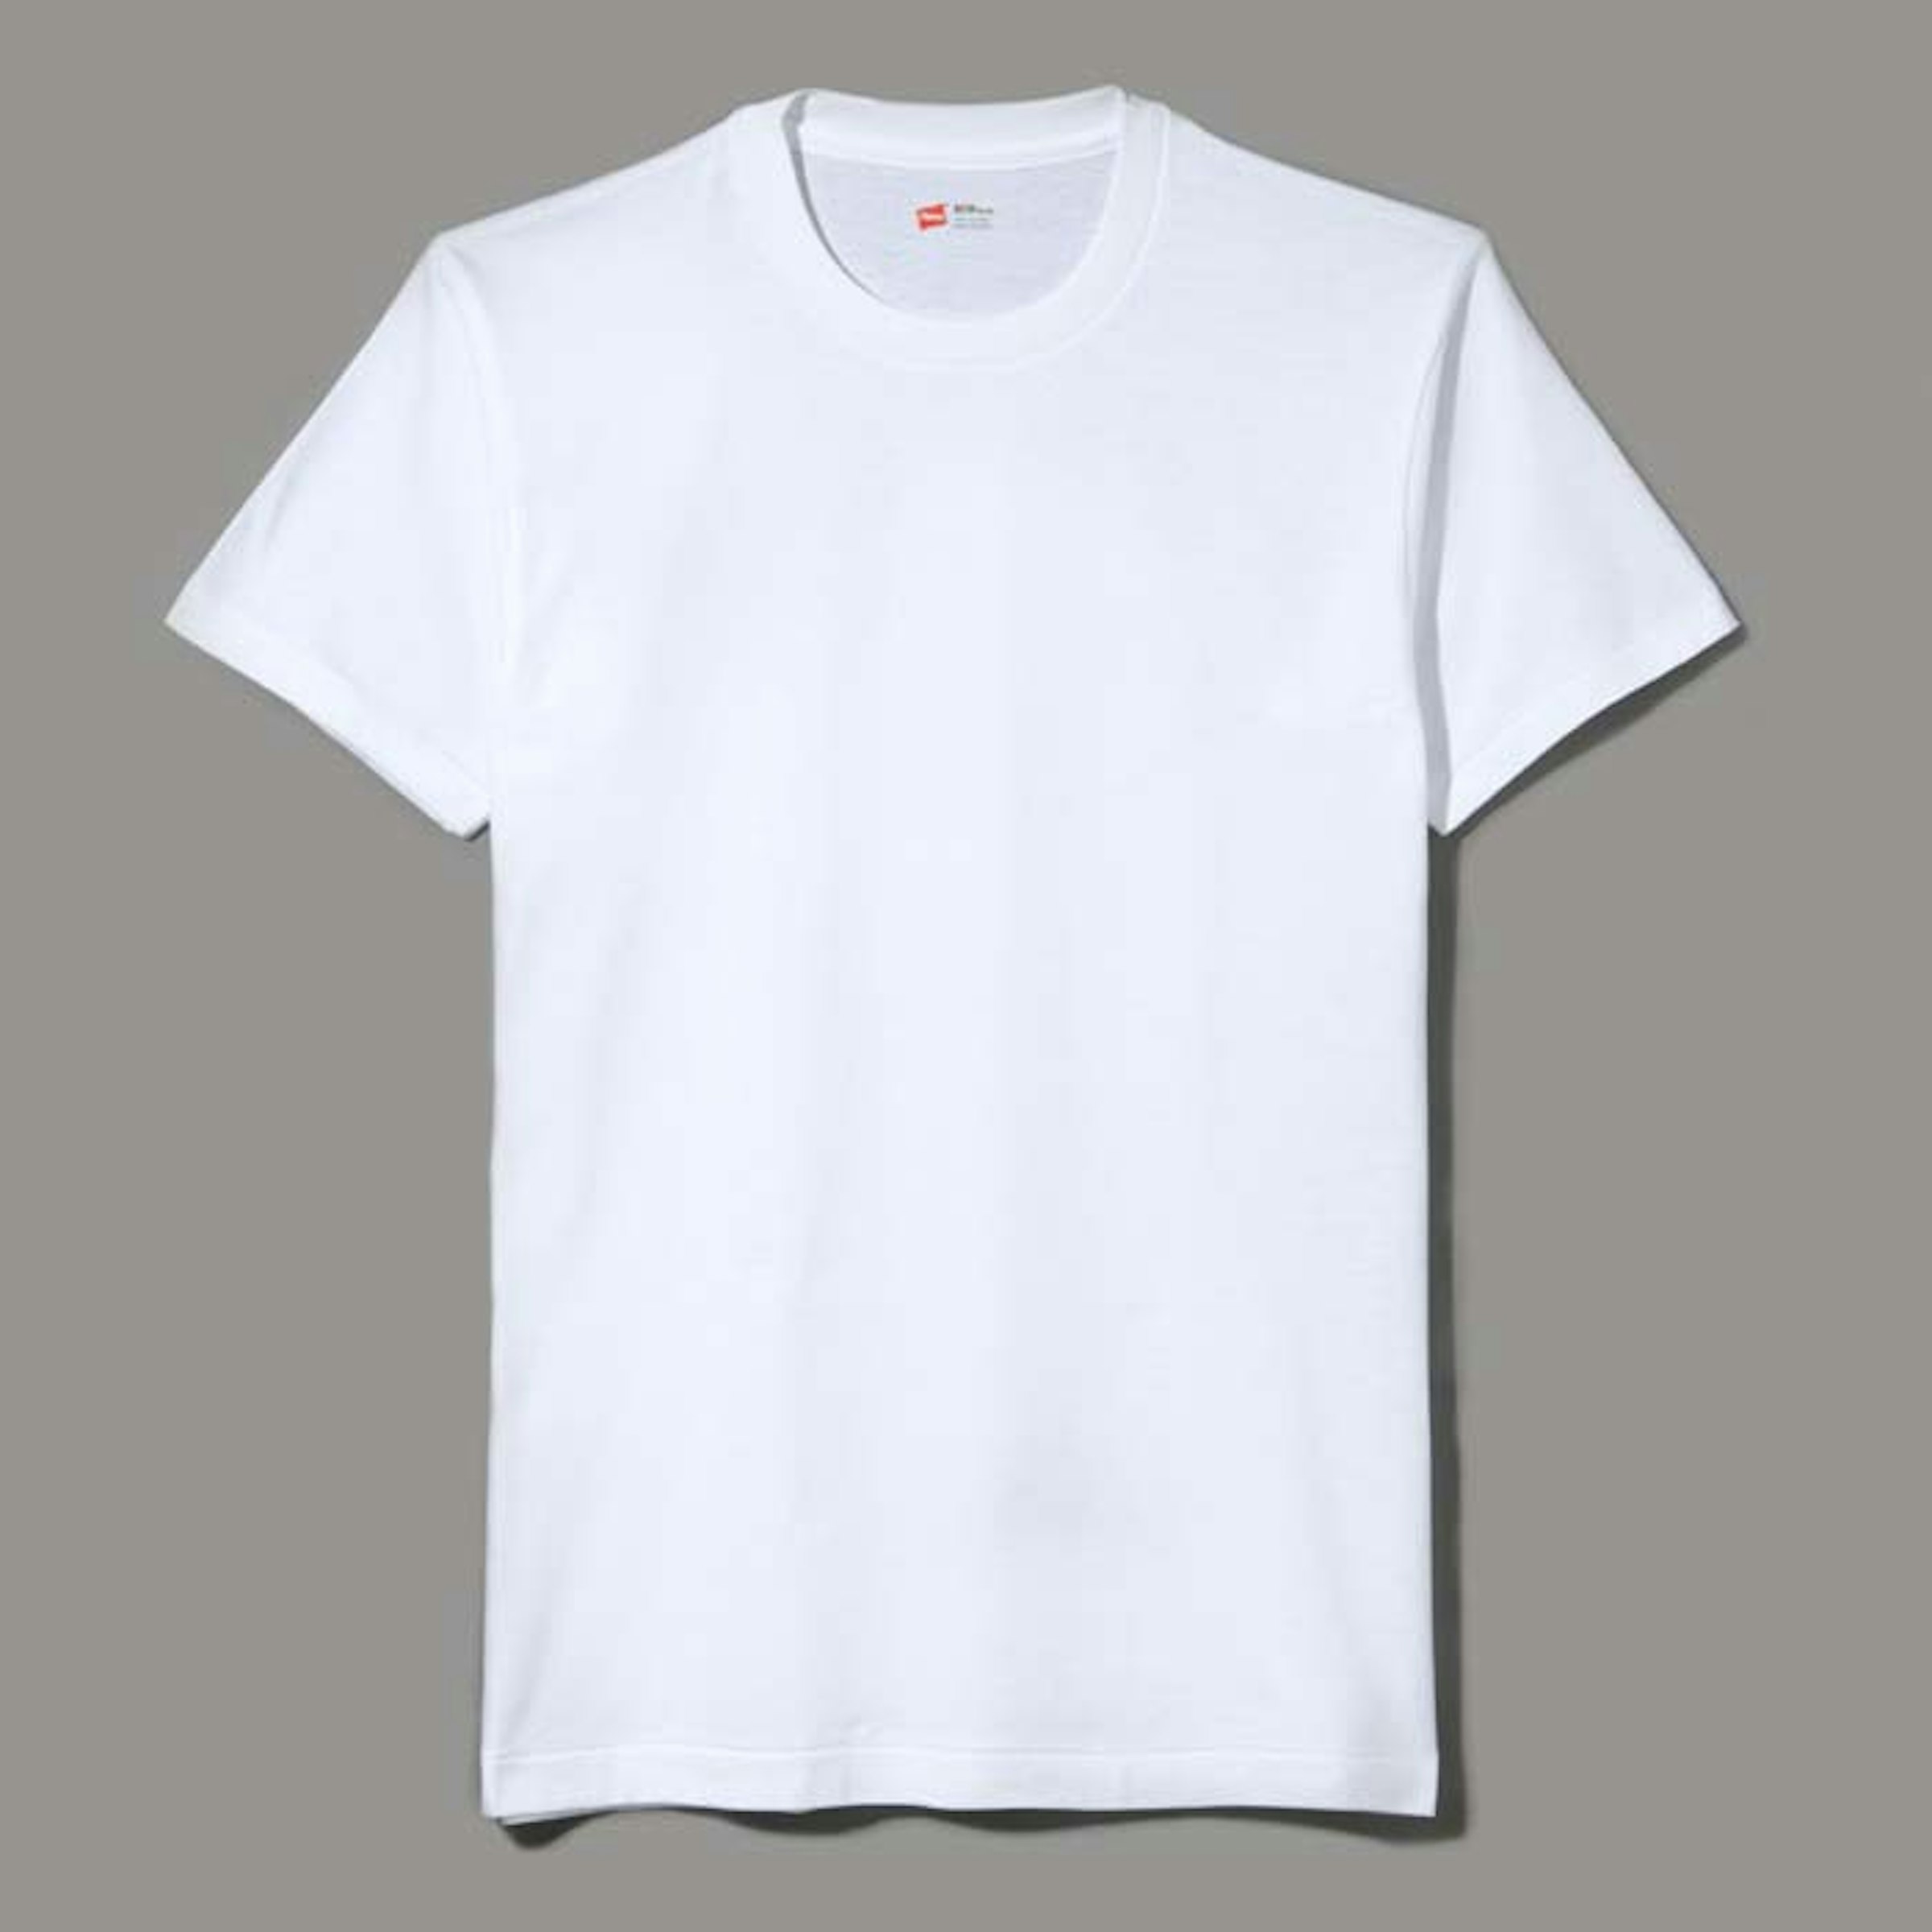 3P Gold Label Crew Neck T-Shirt – 3,520 yen (tax included)